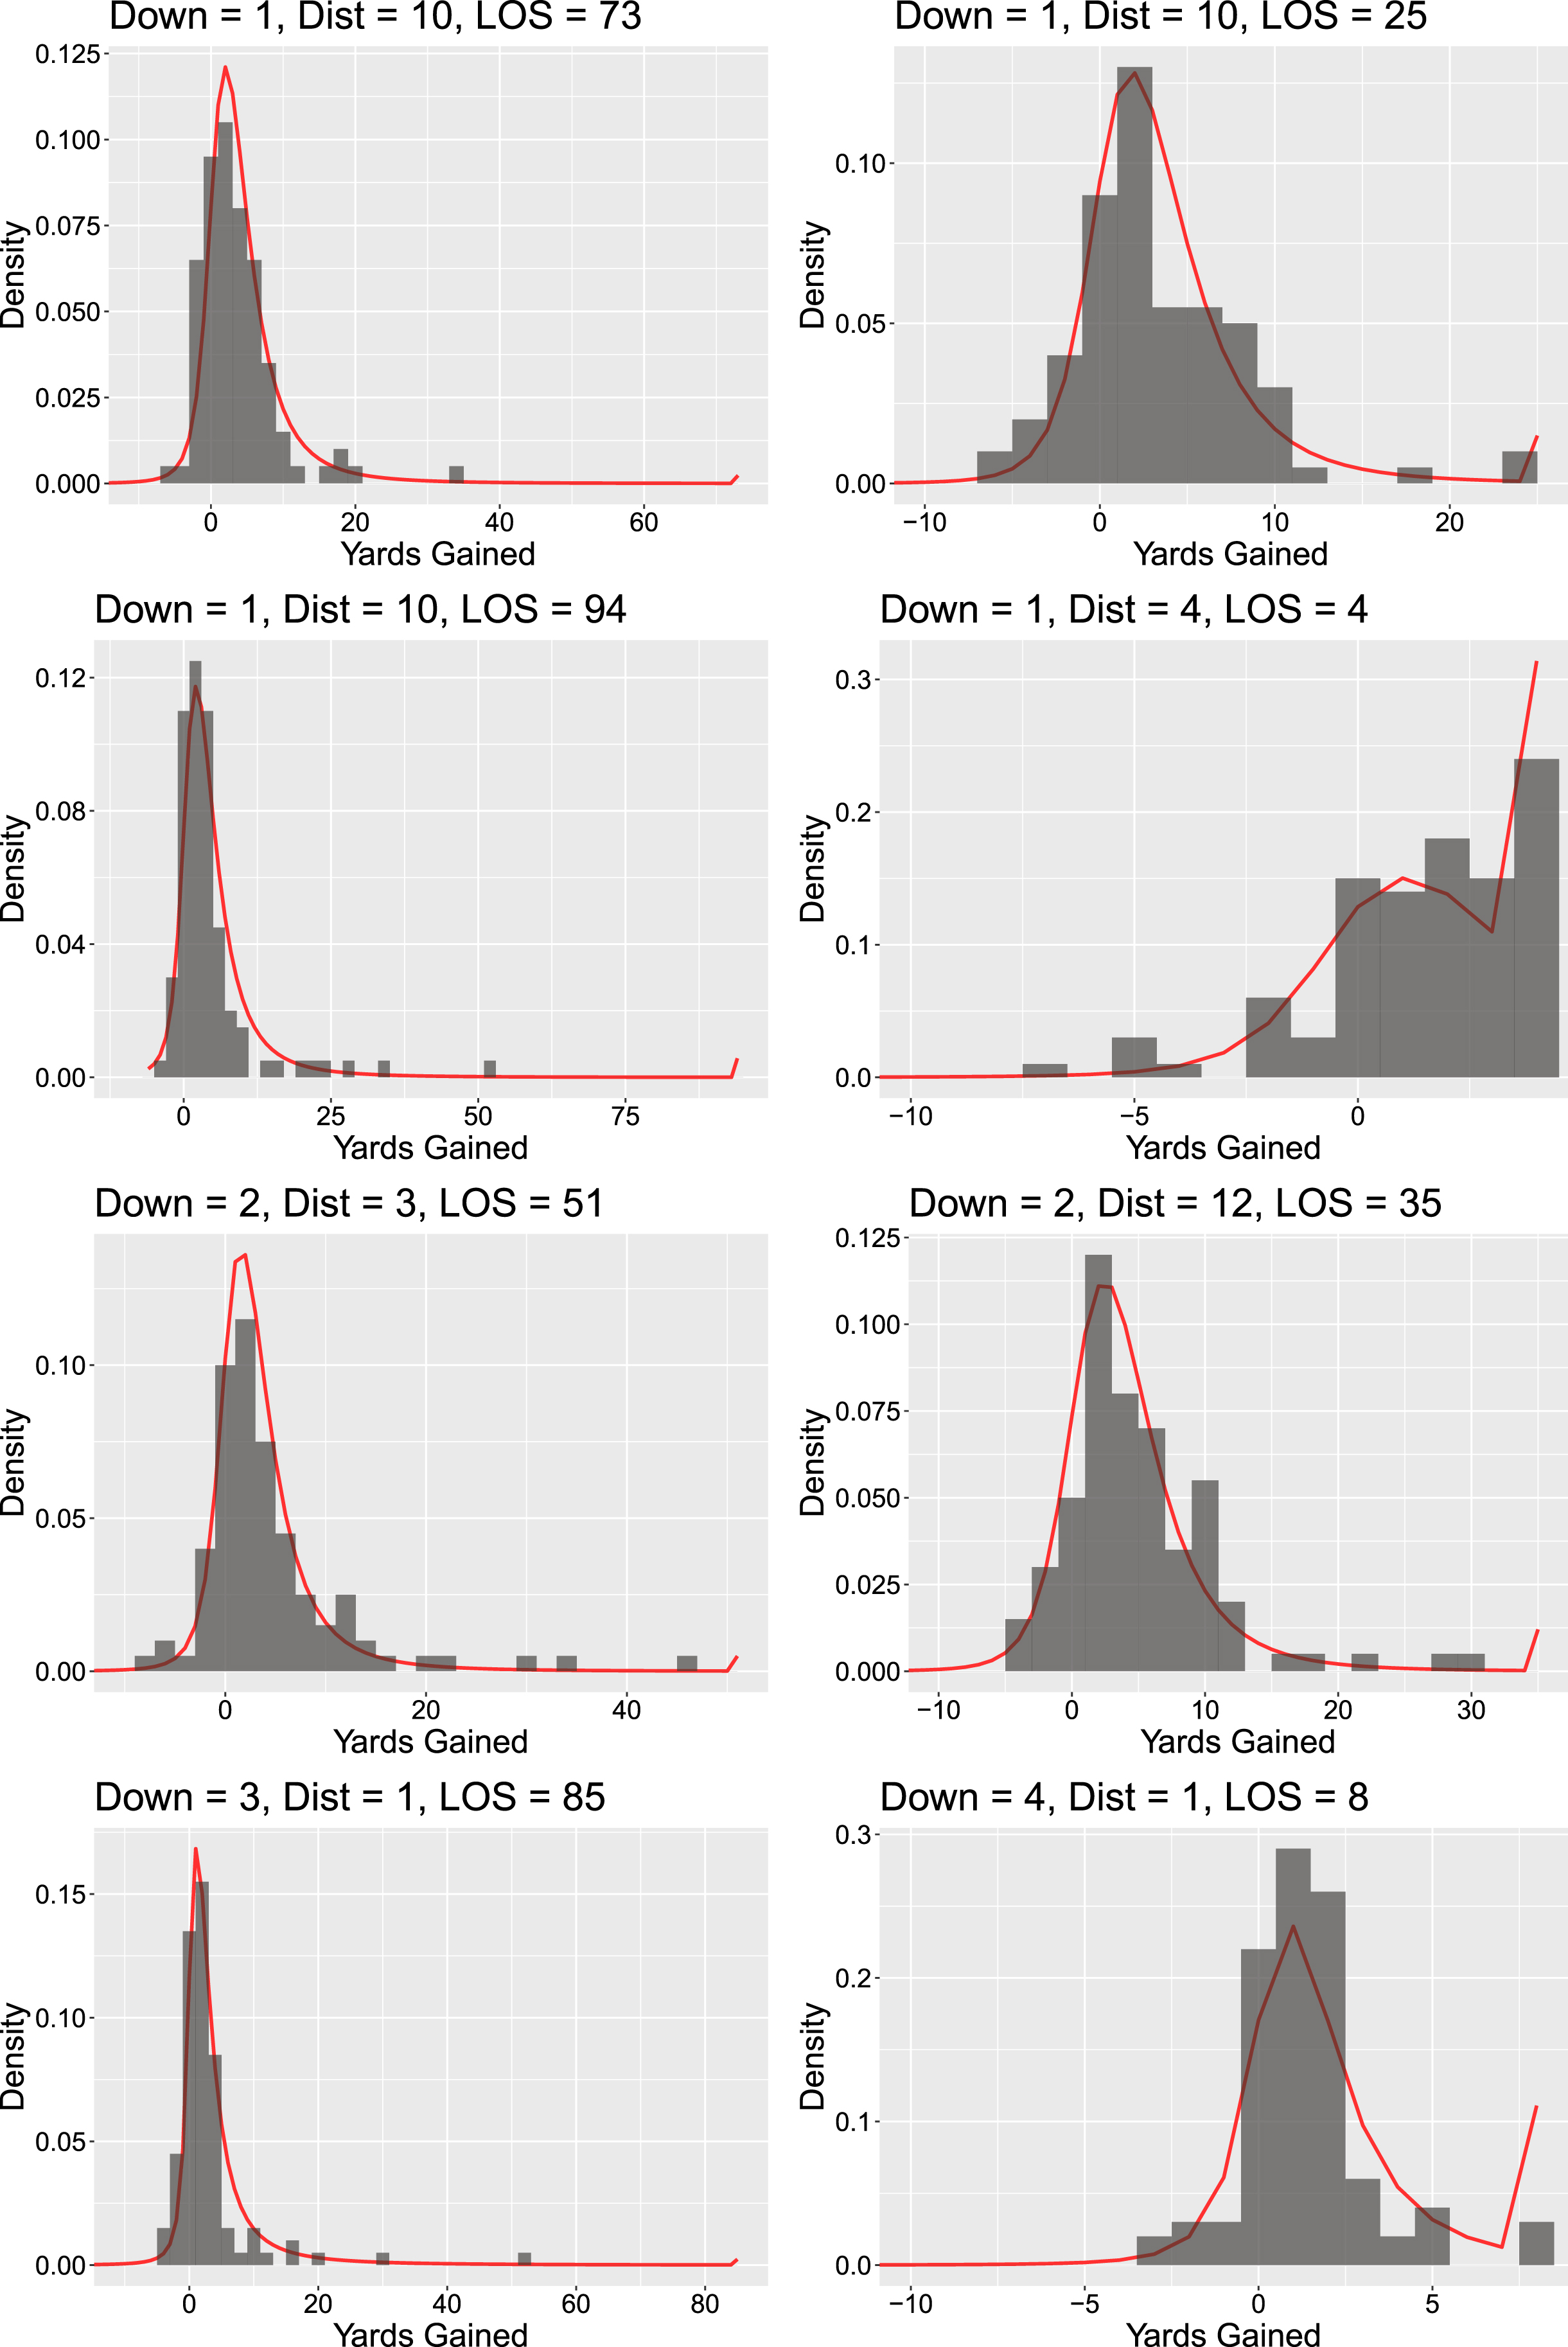 Several examples of randomly chosen predictive distributions for run plays for a specific state, with observed data from similar states shown in histograms. Distributions have been truncated at -10 yards gained to expand images.